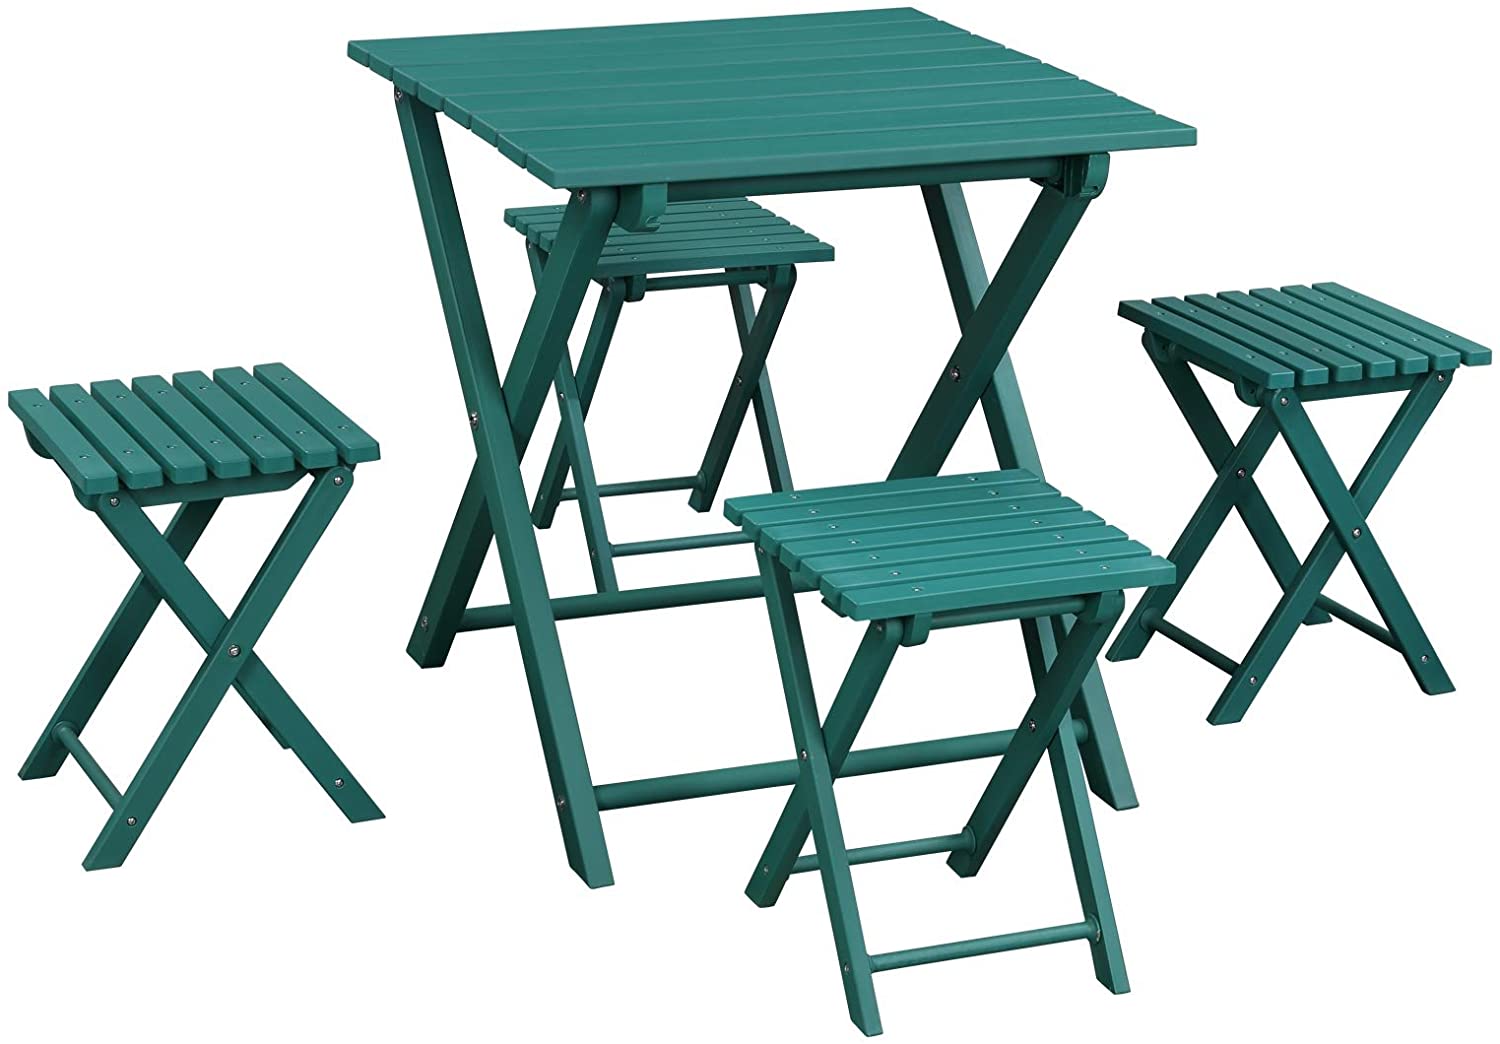 Island Gale 5 Piece Patio Bistro Set Folding Table and Chair Set, Outdoor Camping Furniture Set with Quick-fold Design (Mongolia Green) nylon - image 1 of 3